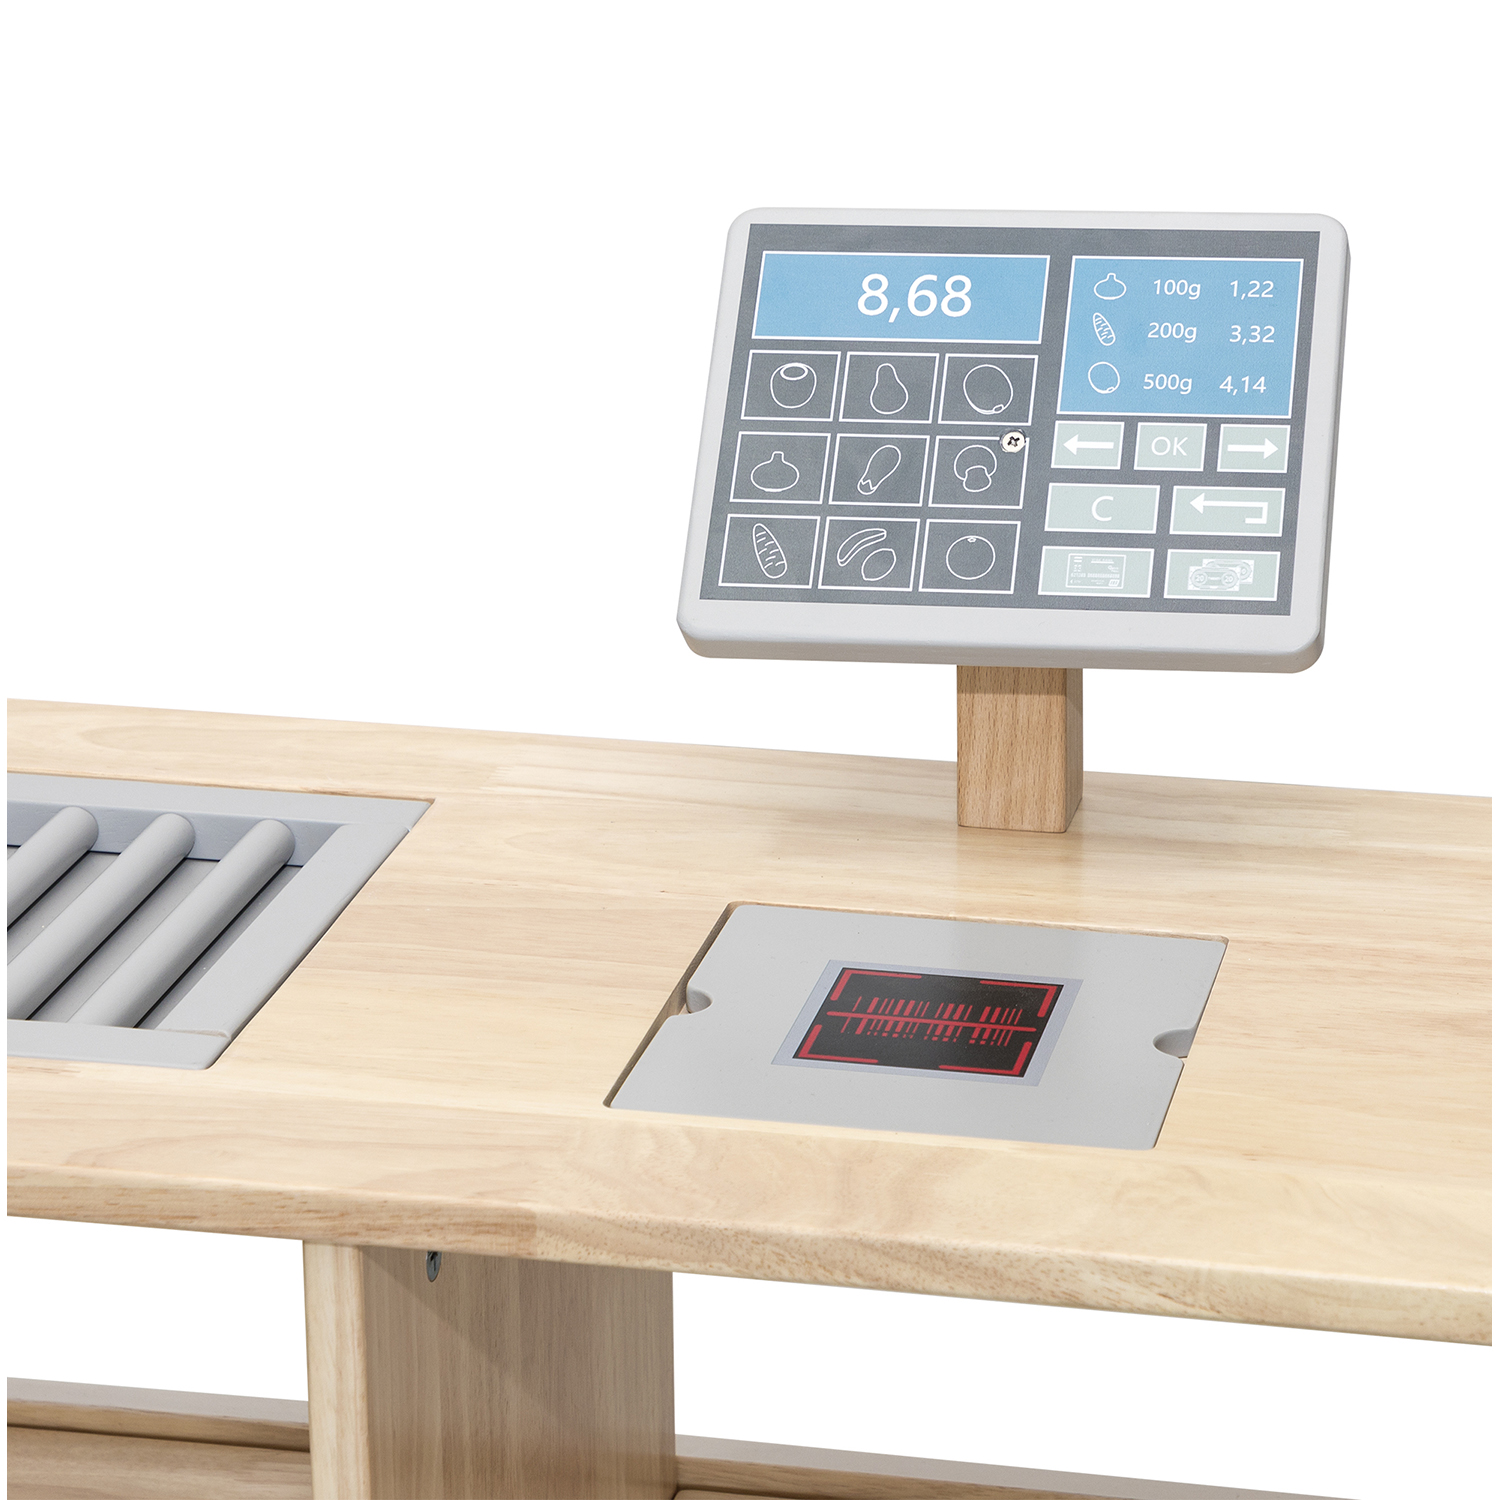 Supermarket food display stand features a till and scanner